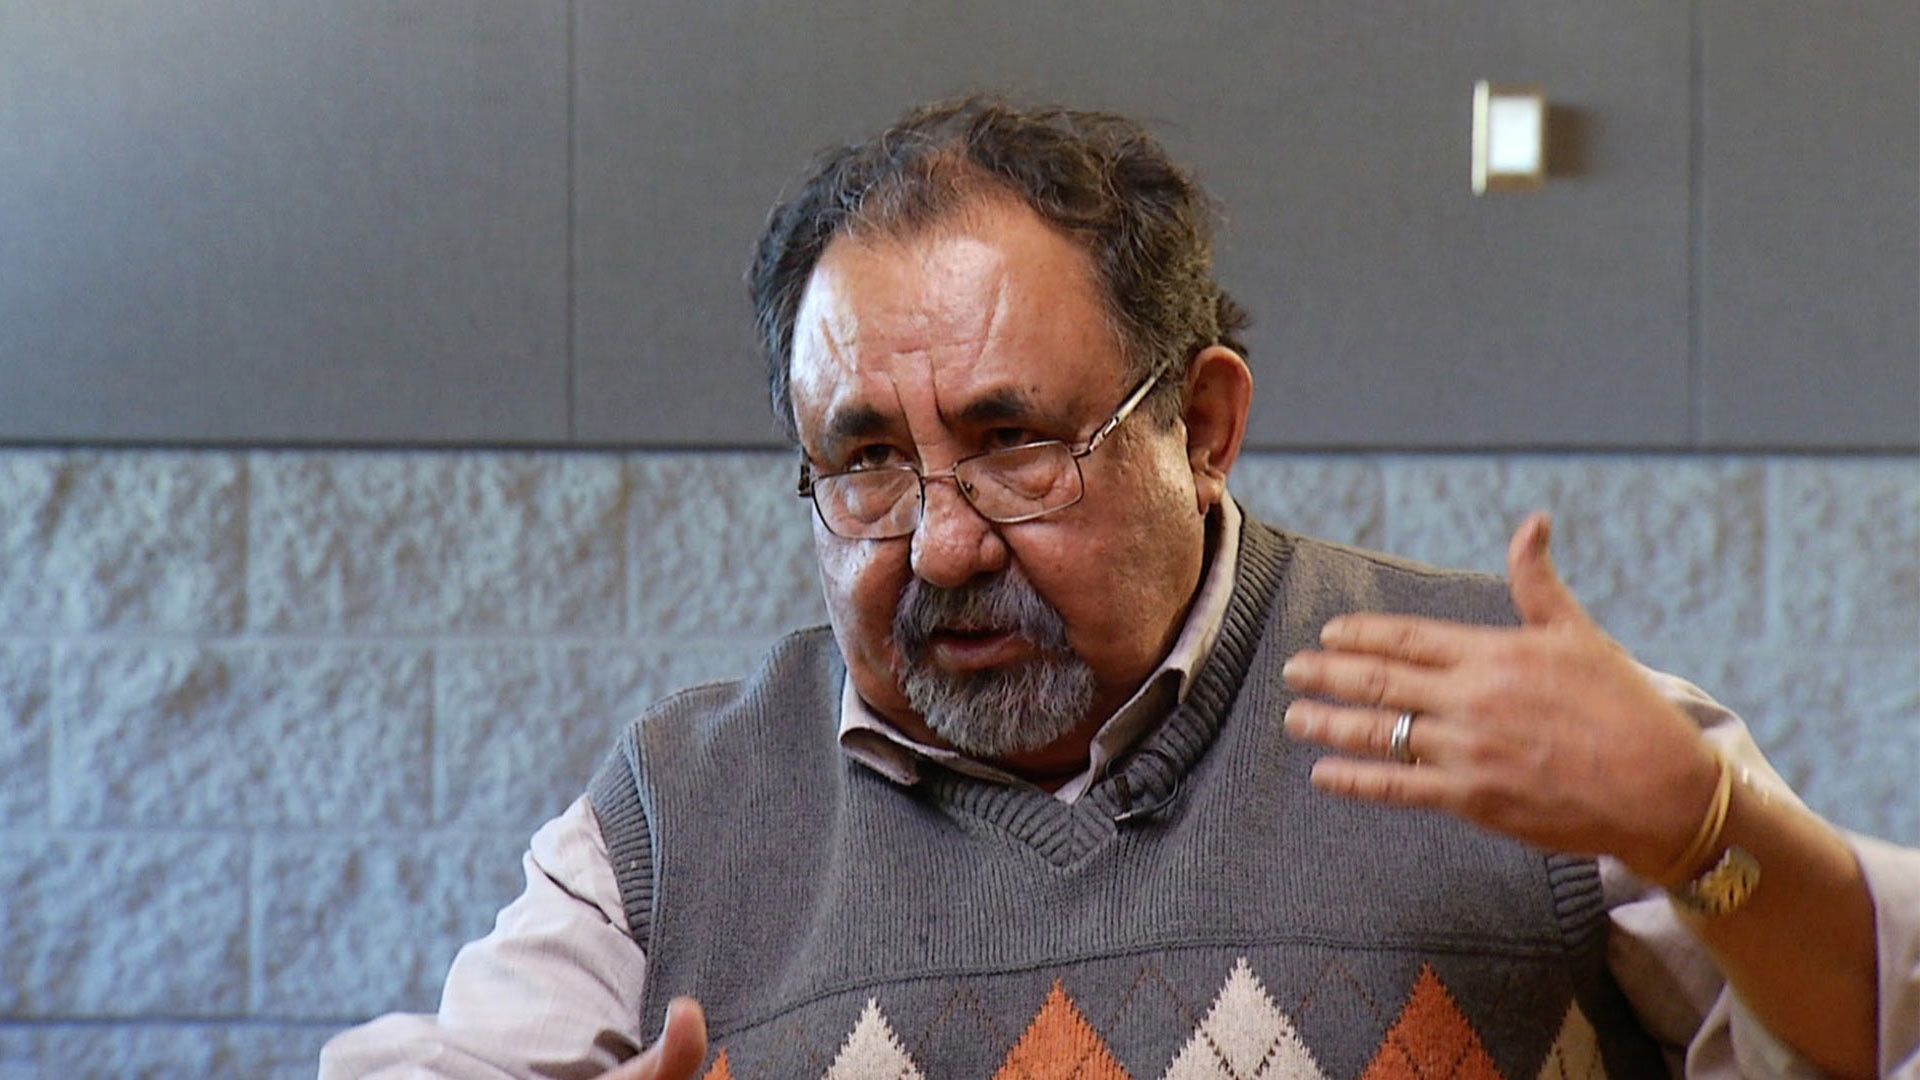 U. S. Rep. Raul Grijalva has made repeated calls to halt border wall construction during the pandemic.